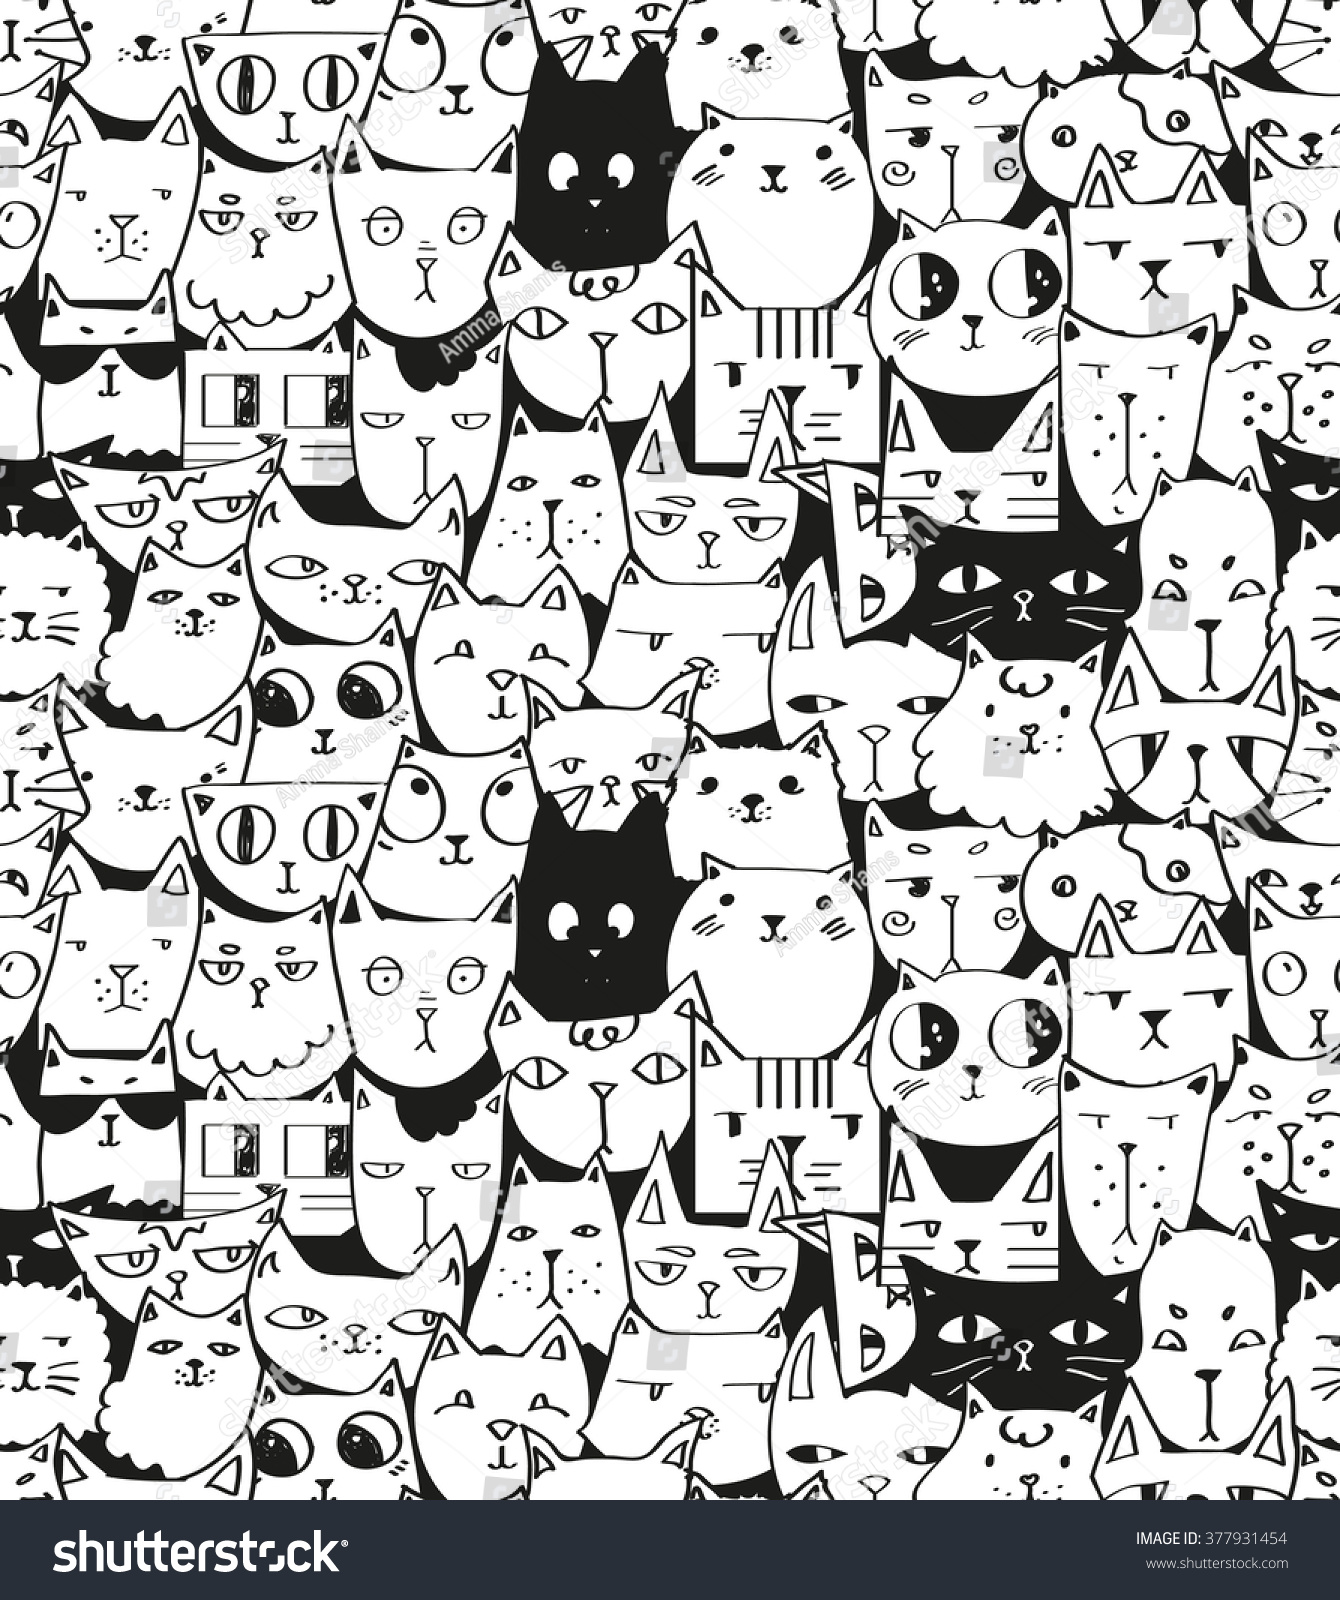 Hand Drawn Cats Seamless Vector Pattern Stock Vector 377931454 ...